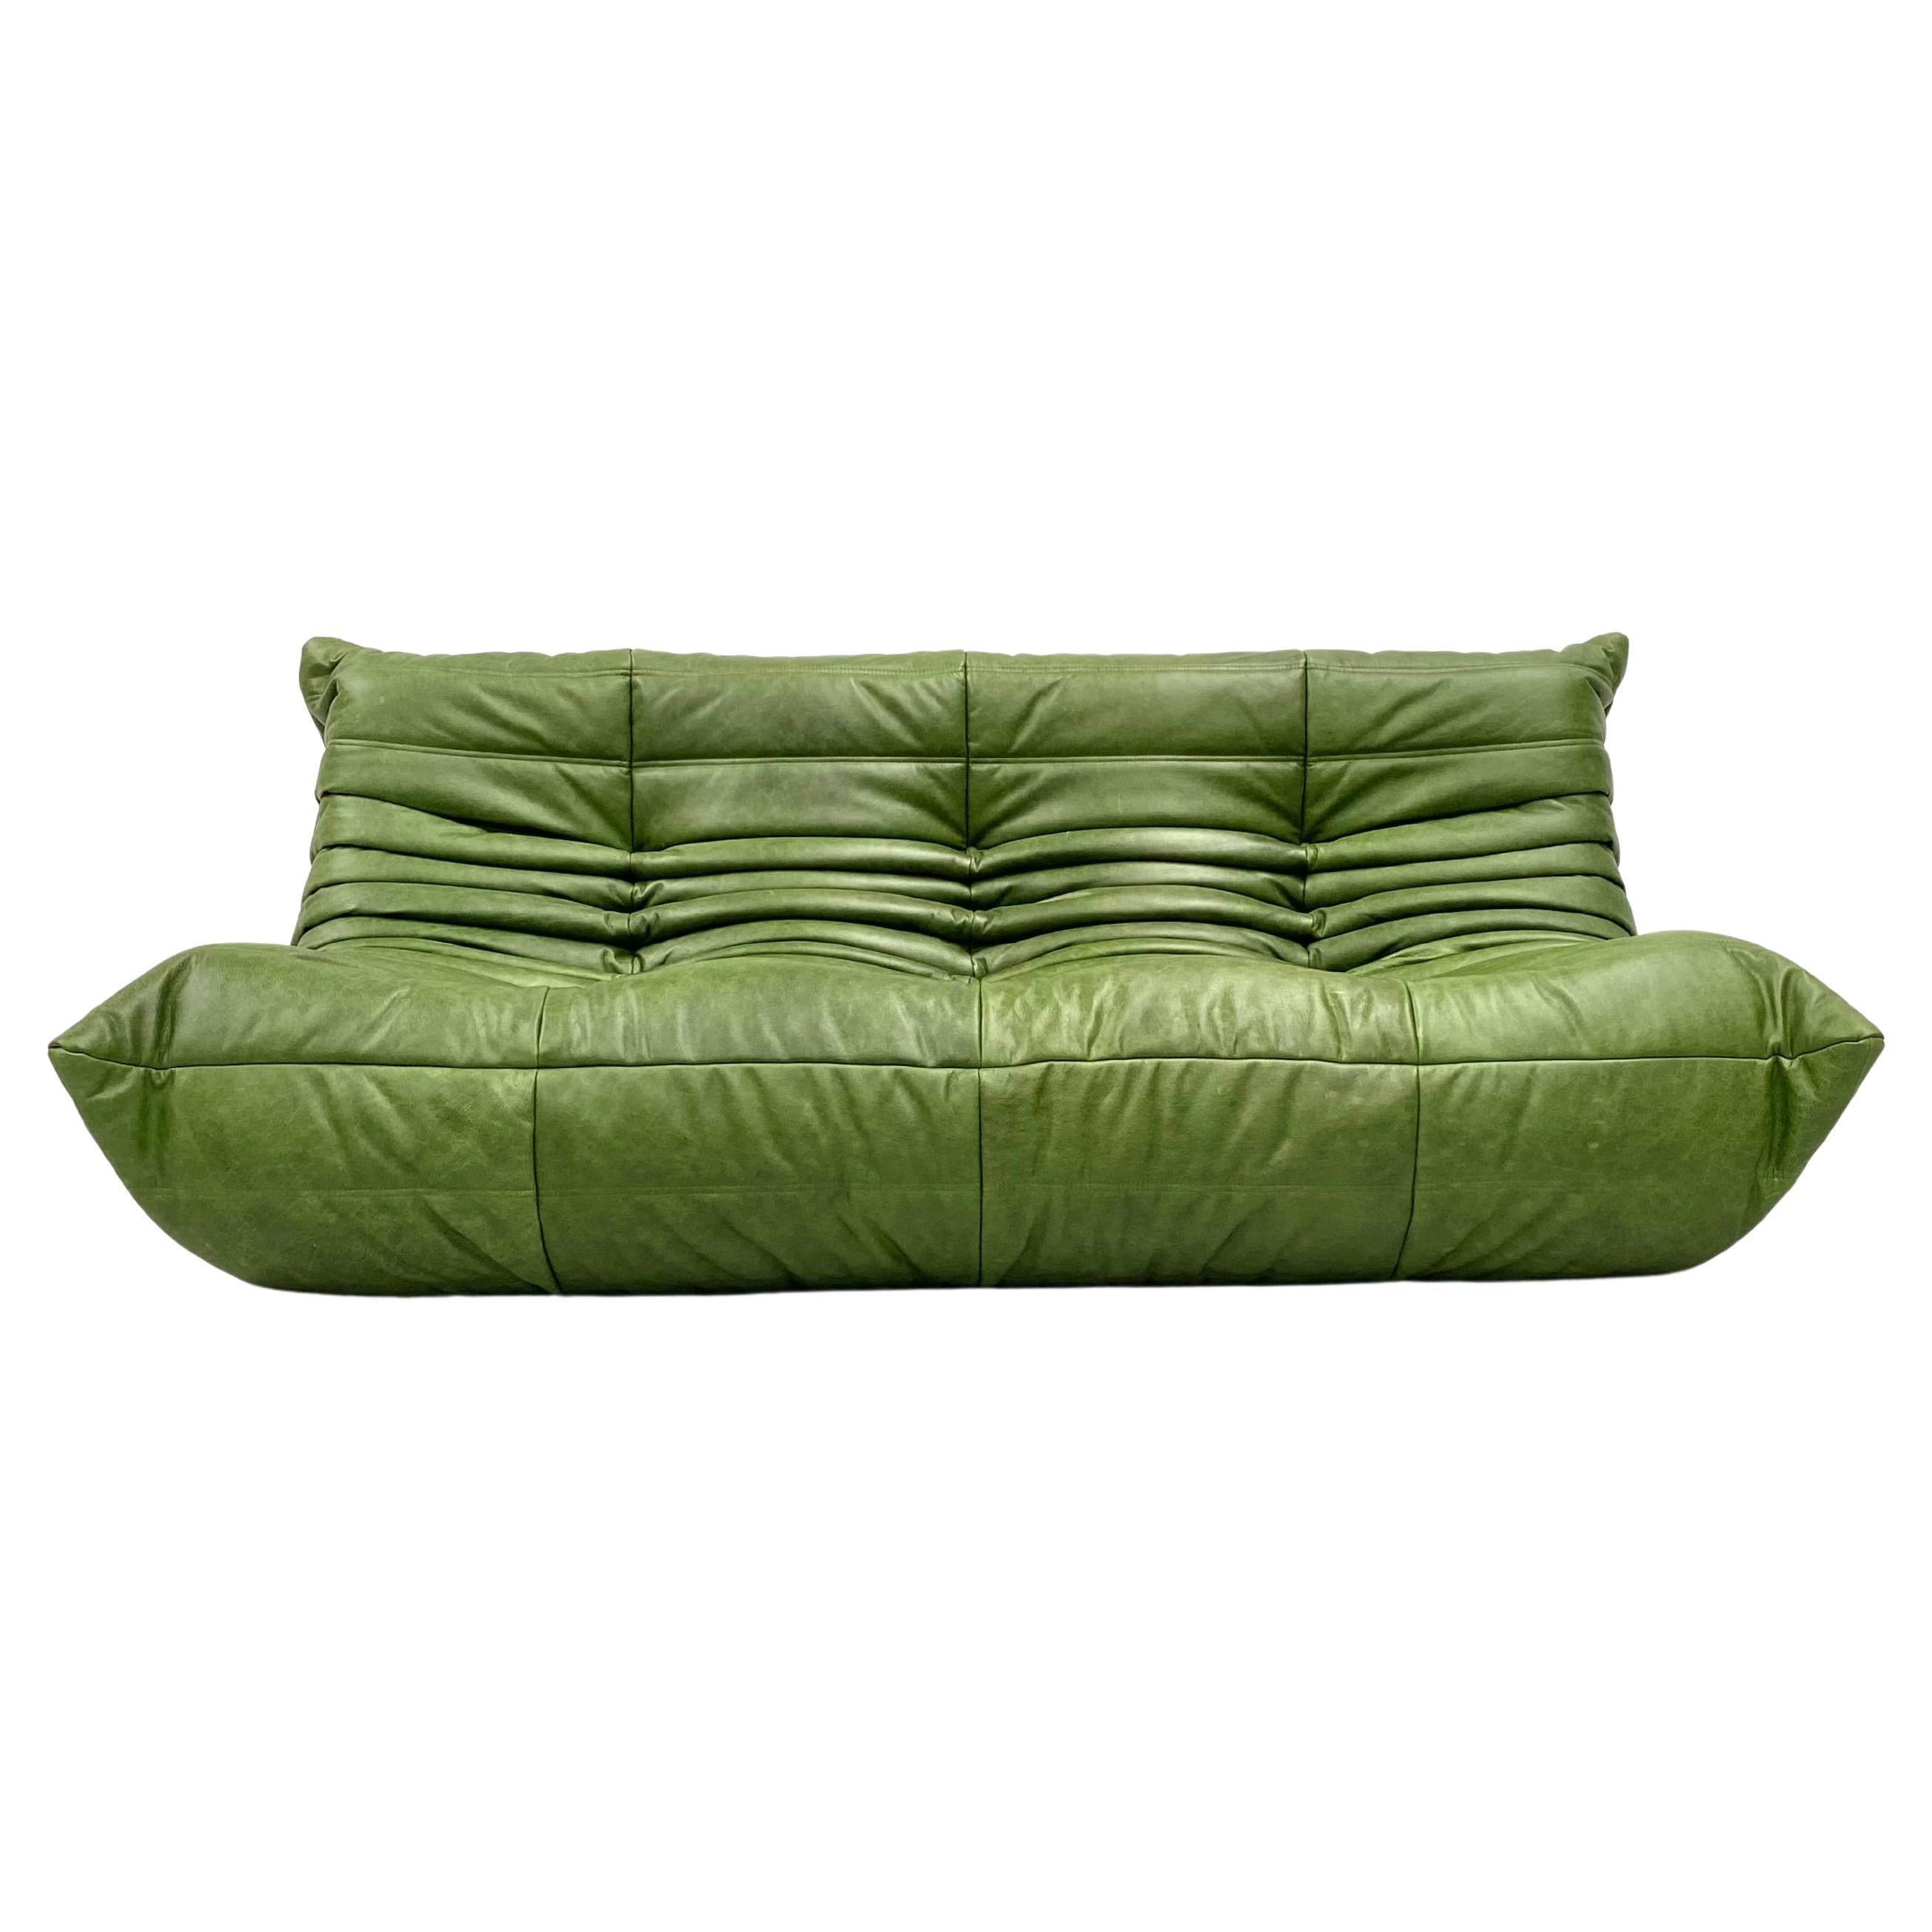 French  Togo Sofa in Green  Leather by Michel Ducaroy for Ligne Roset.